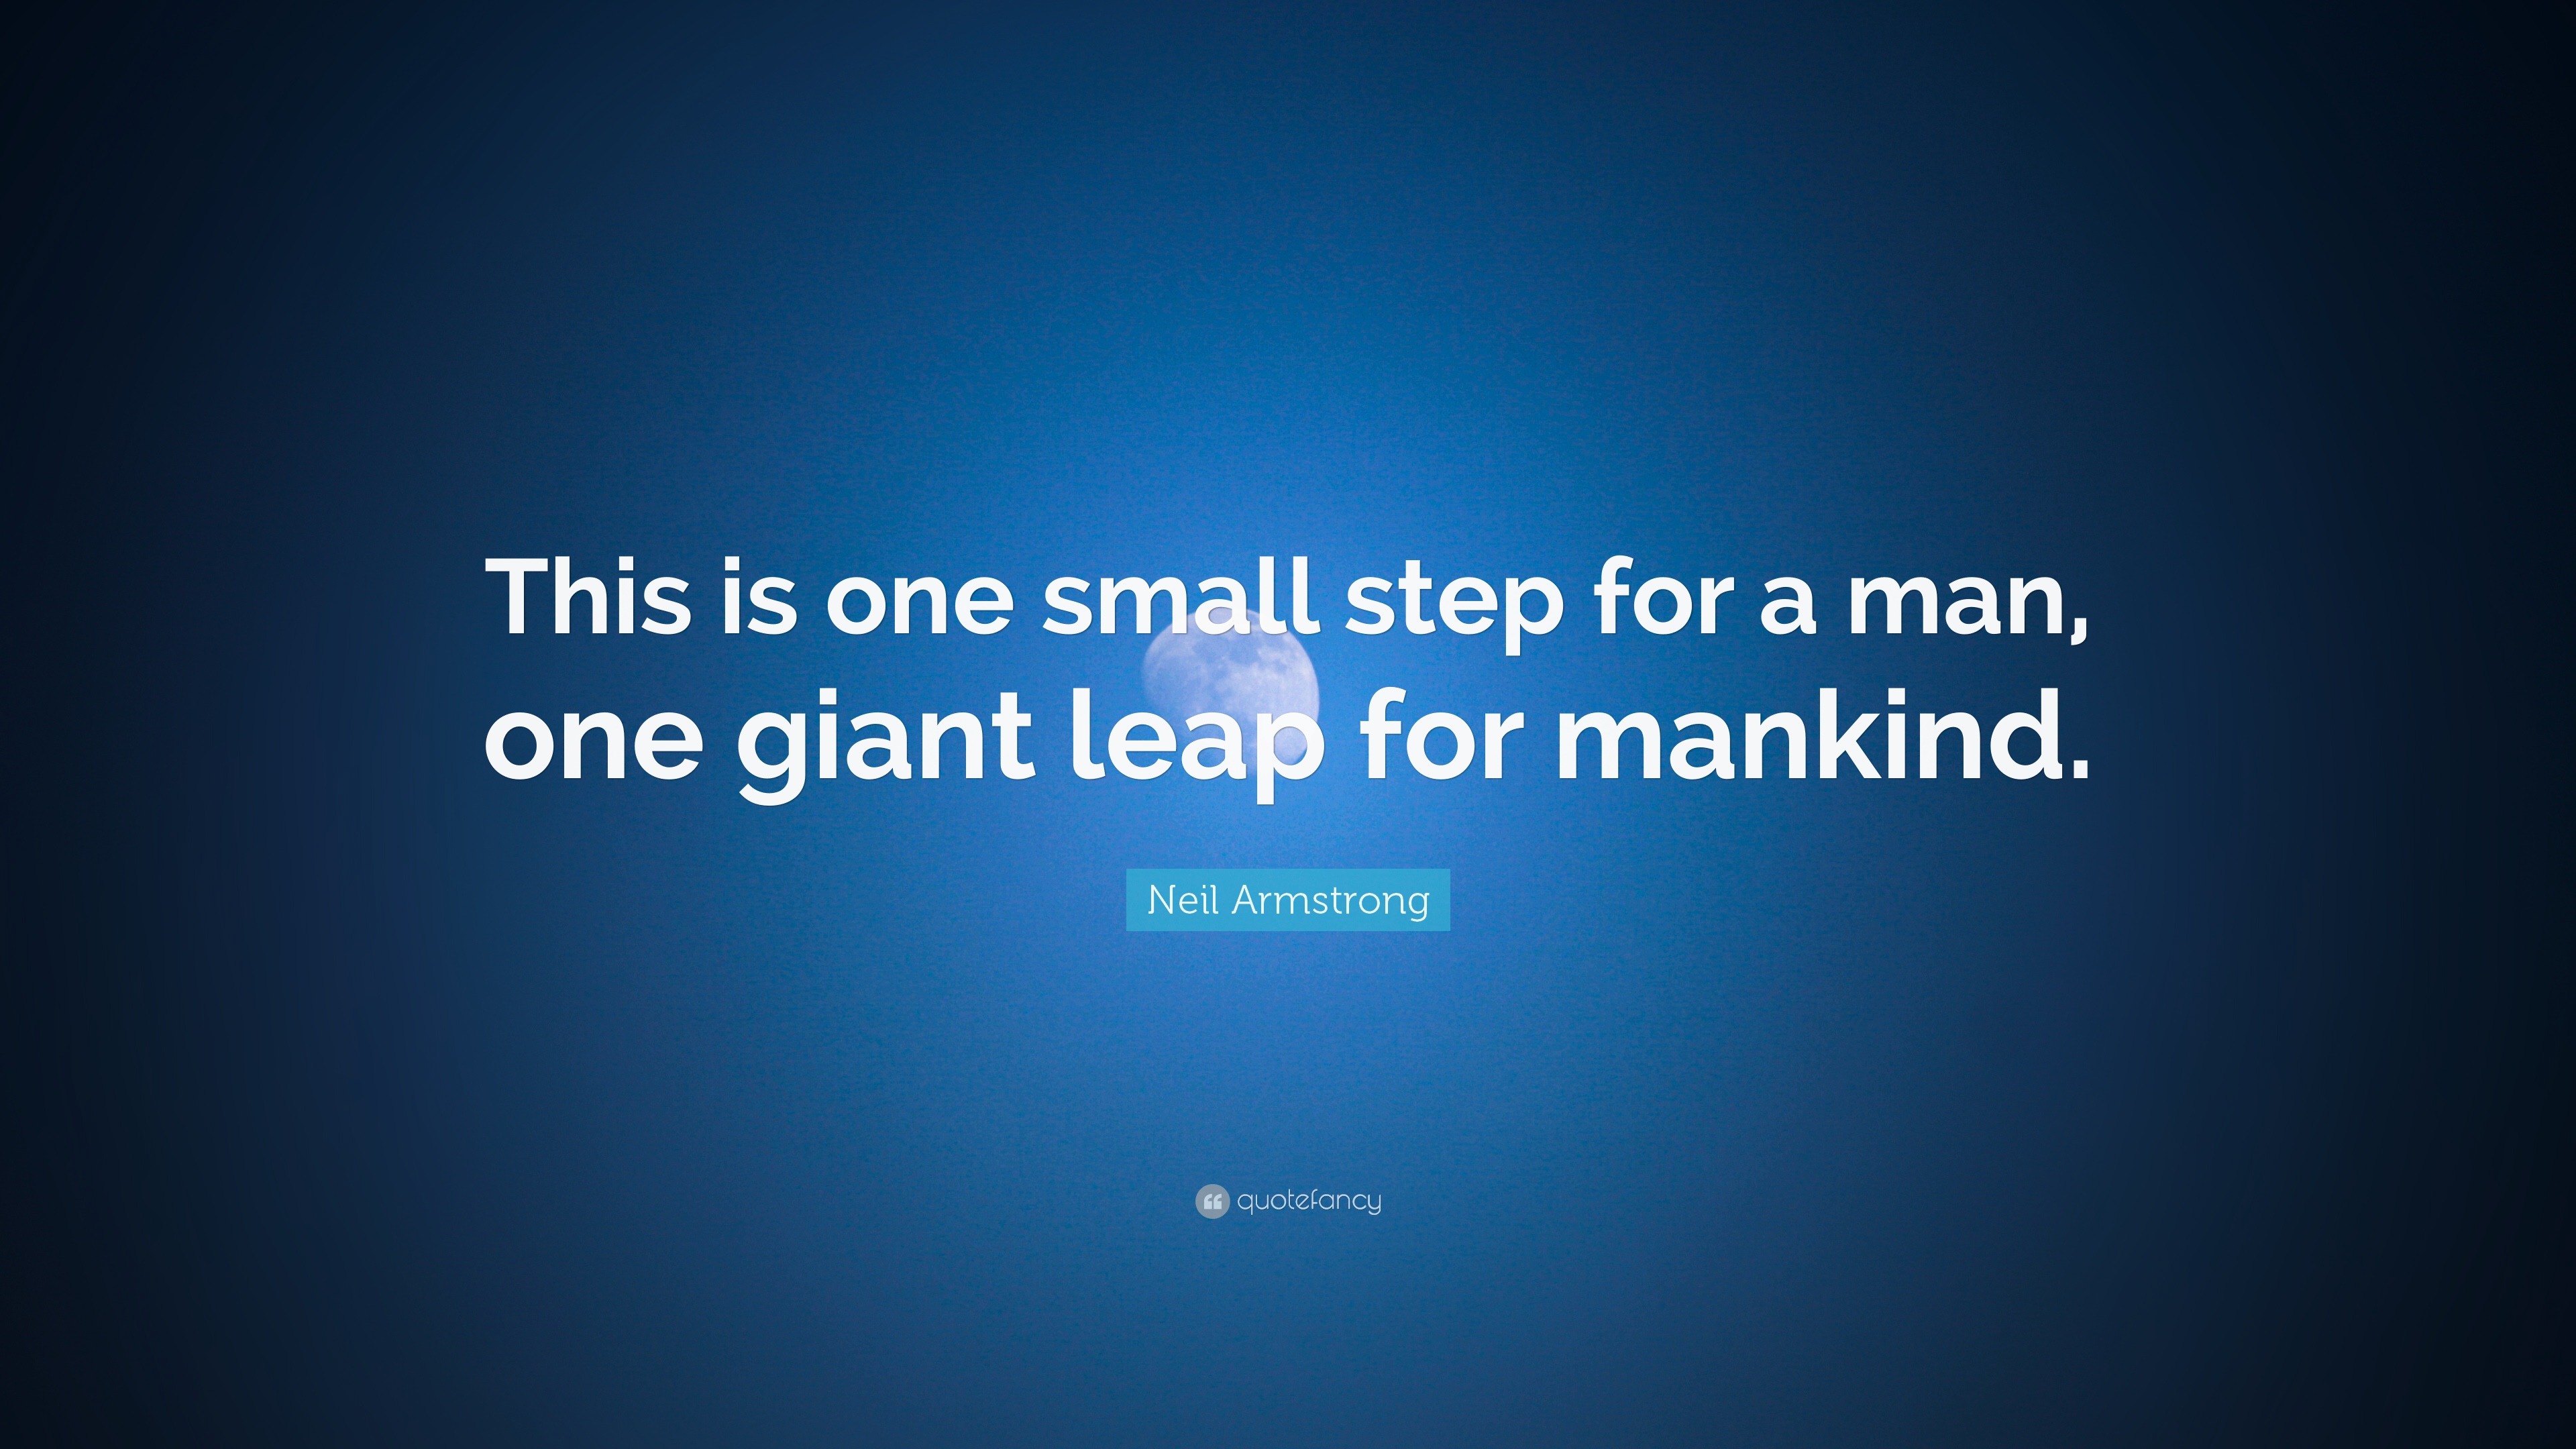 Neil Armstrong Quote: “This is one small step for a man, one giant leap for mankind.”